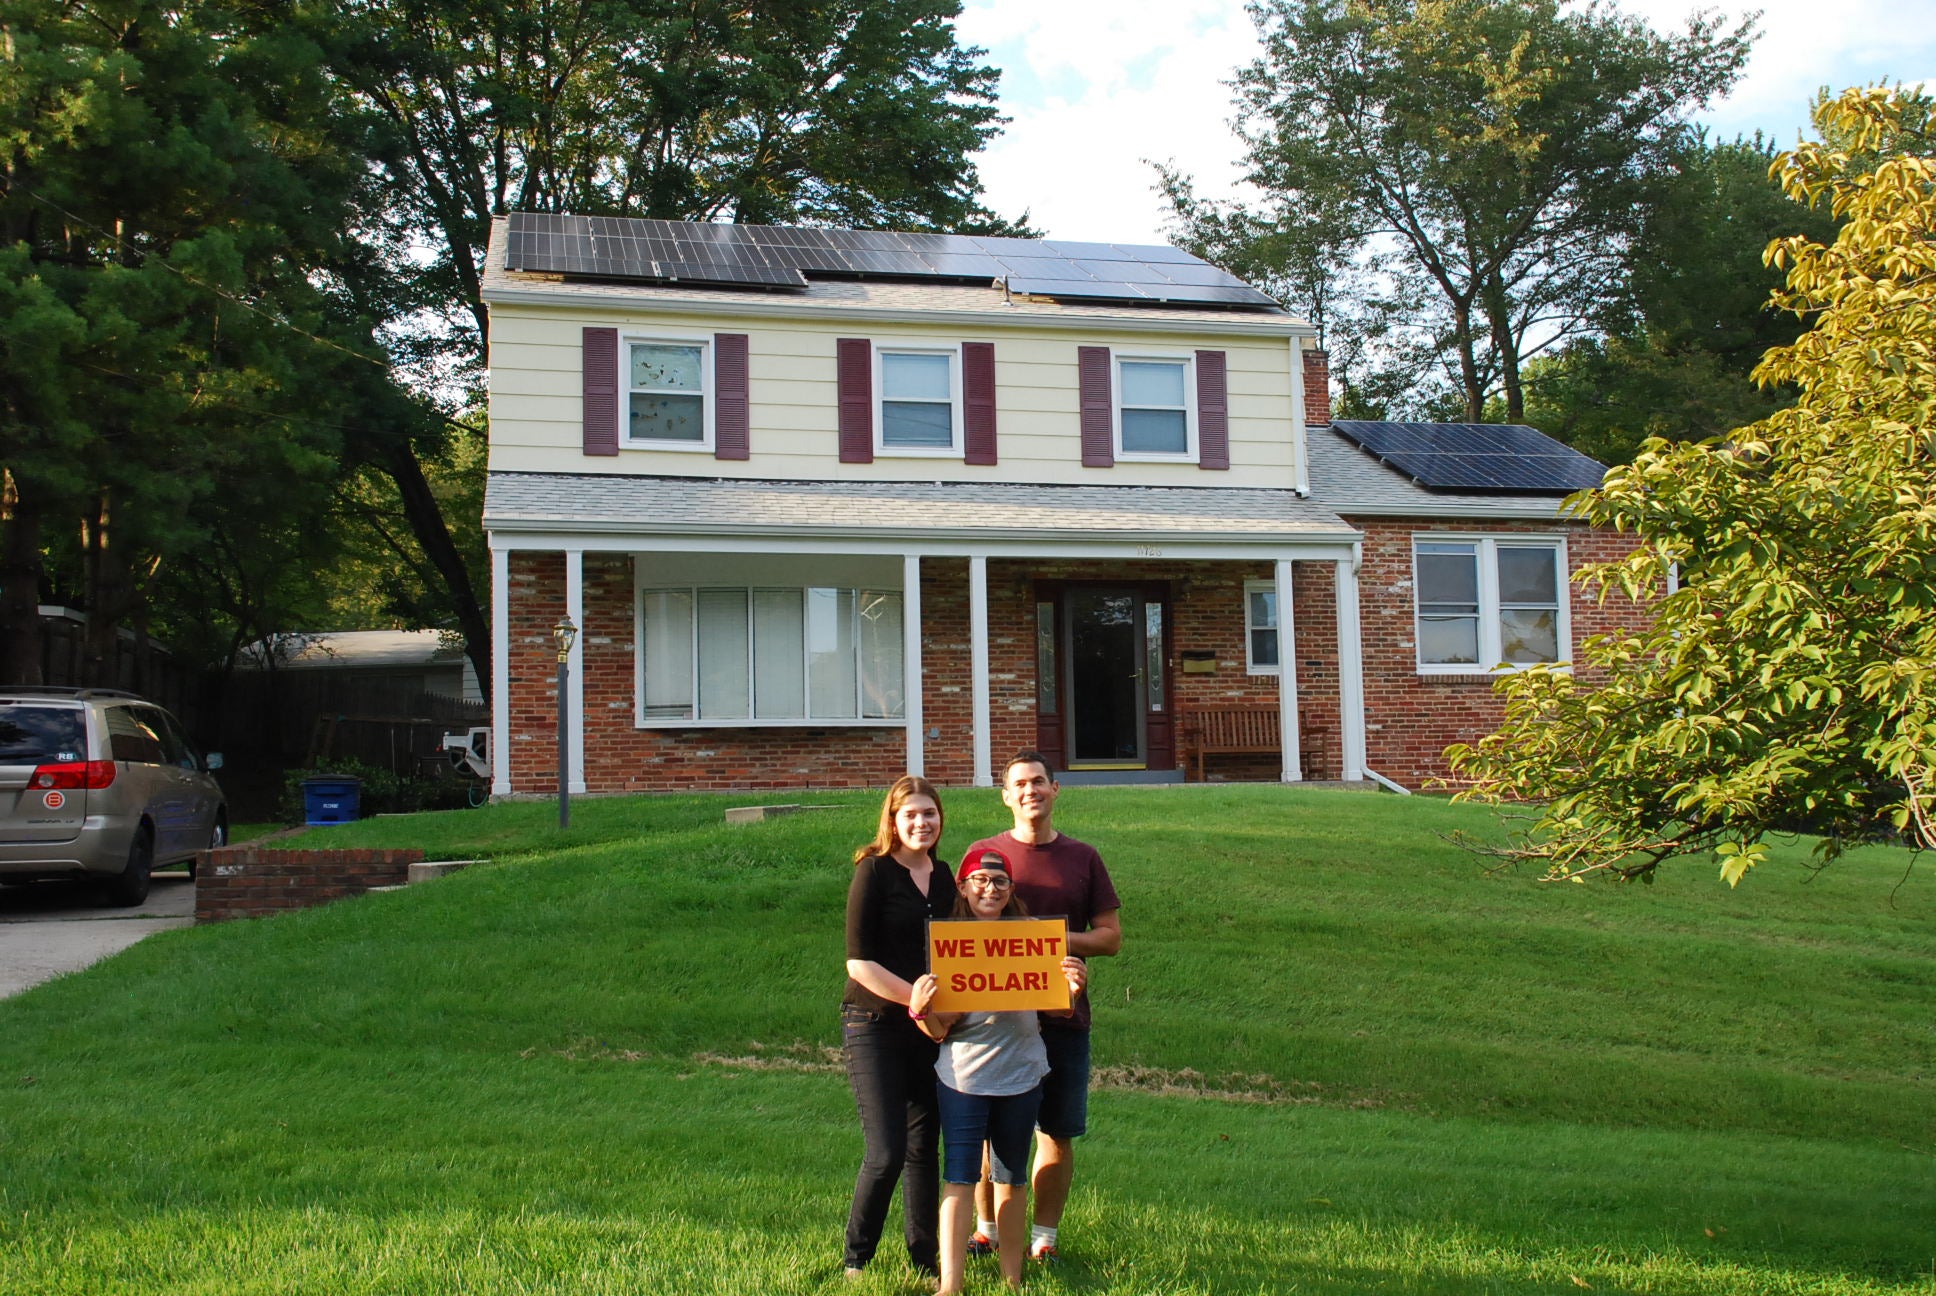 Working with homeowners associations about solar panels